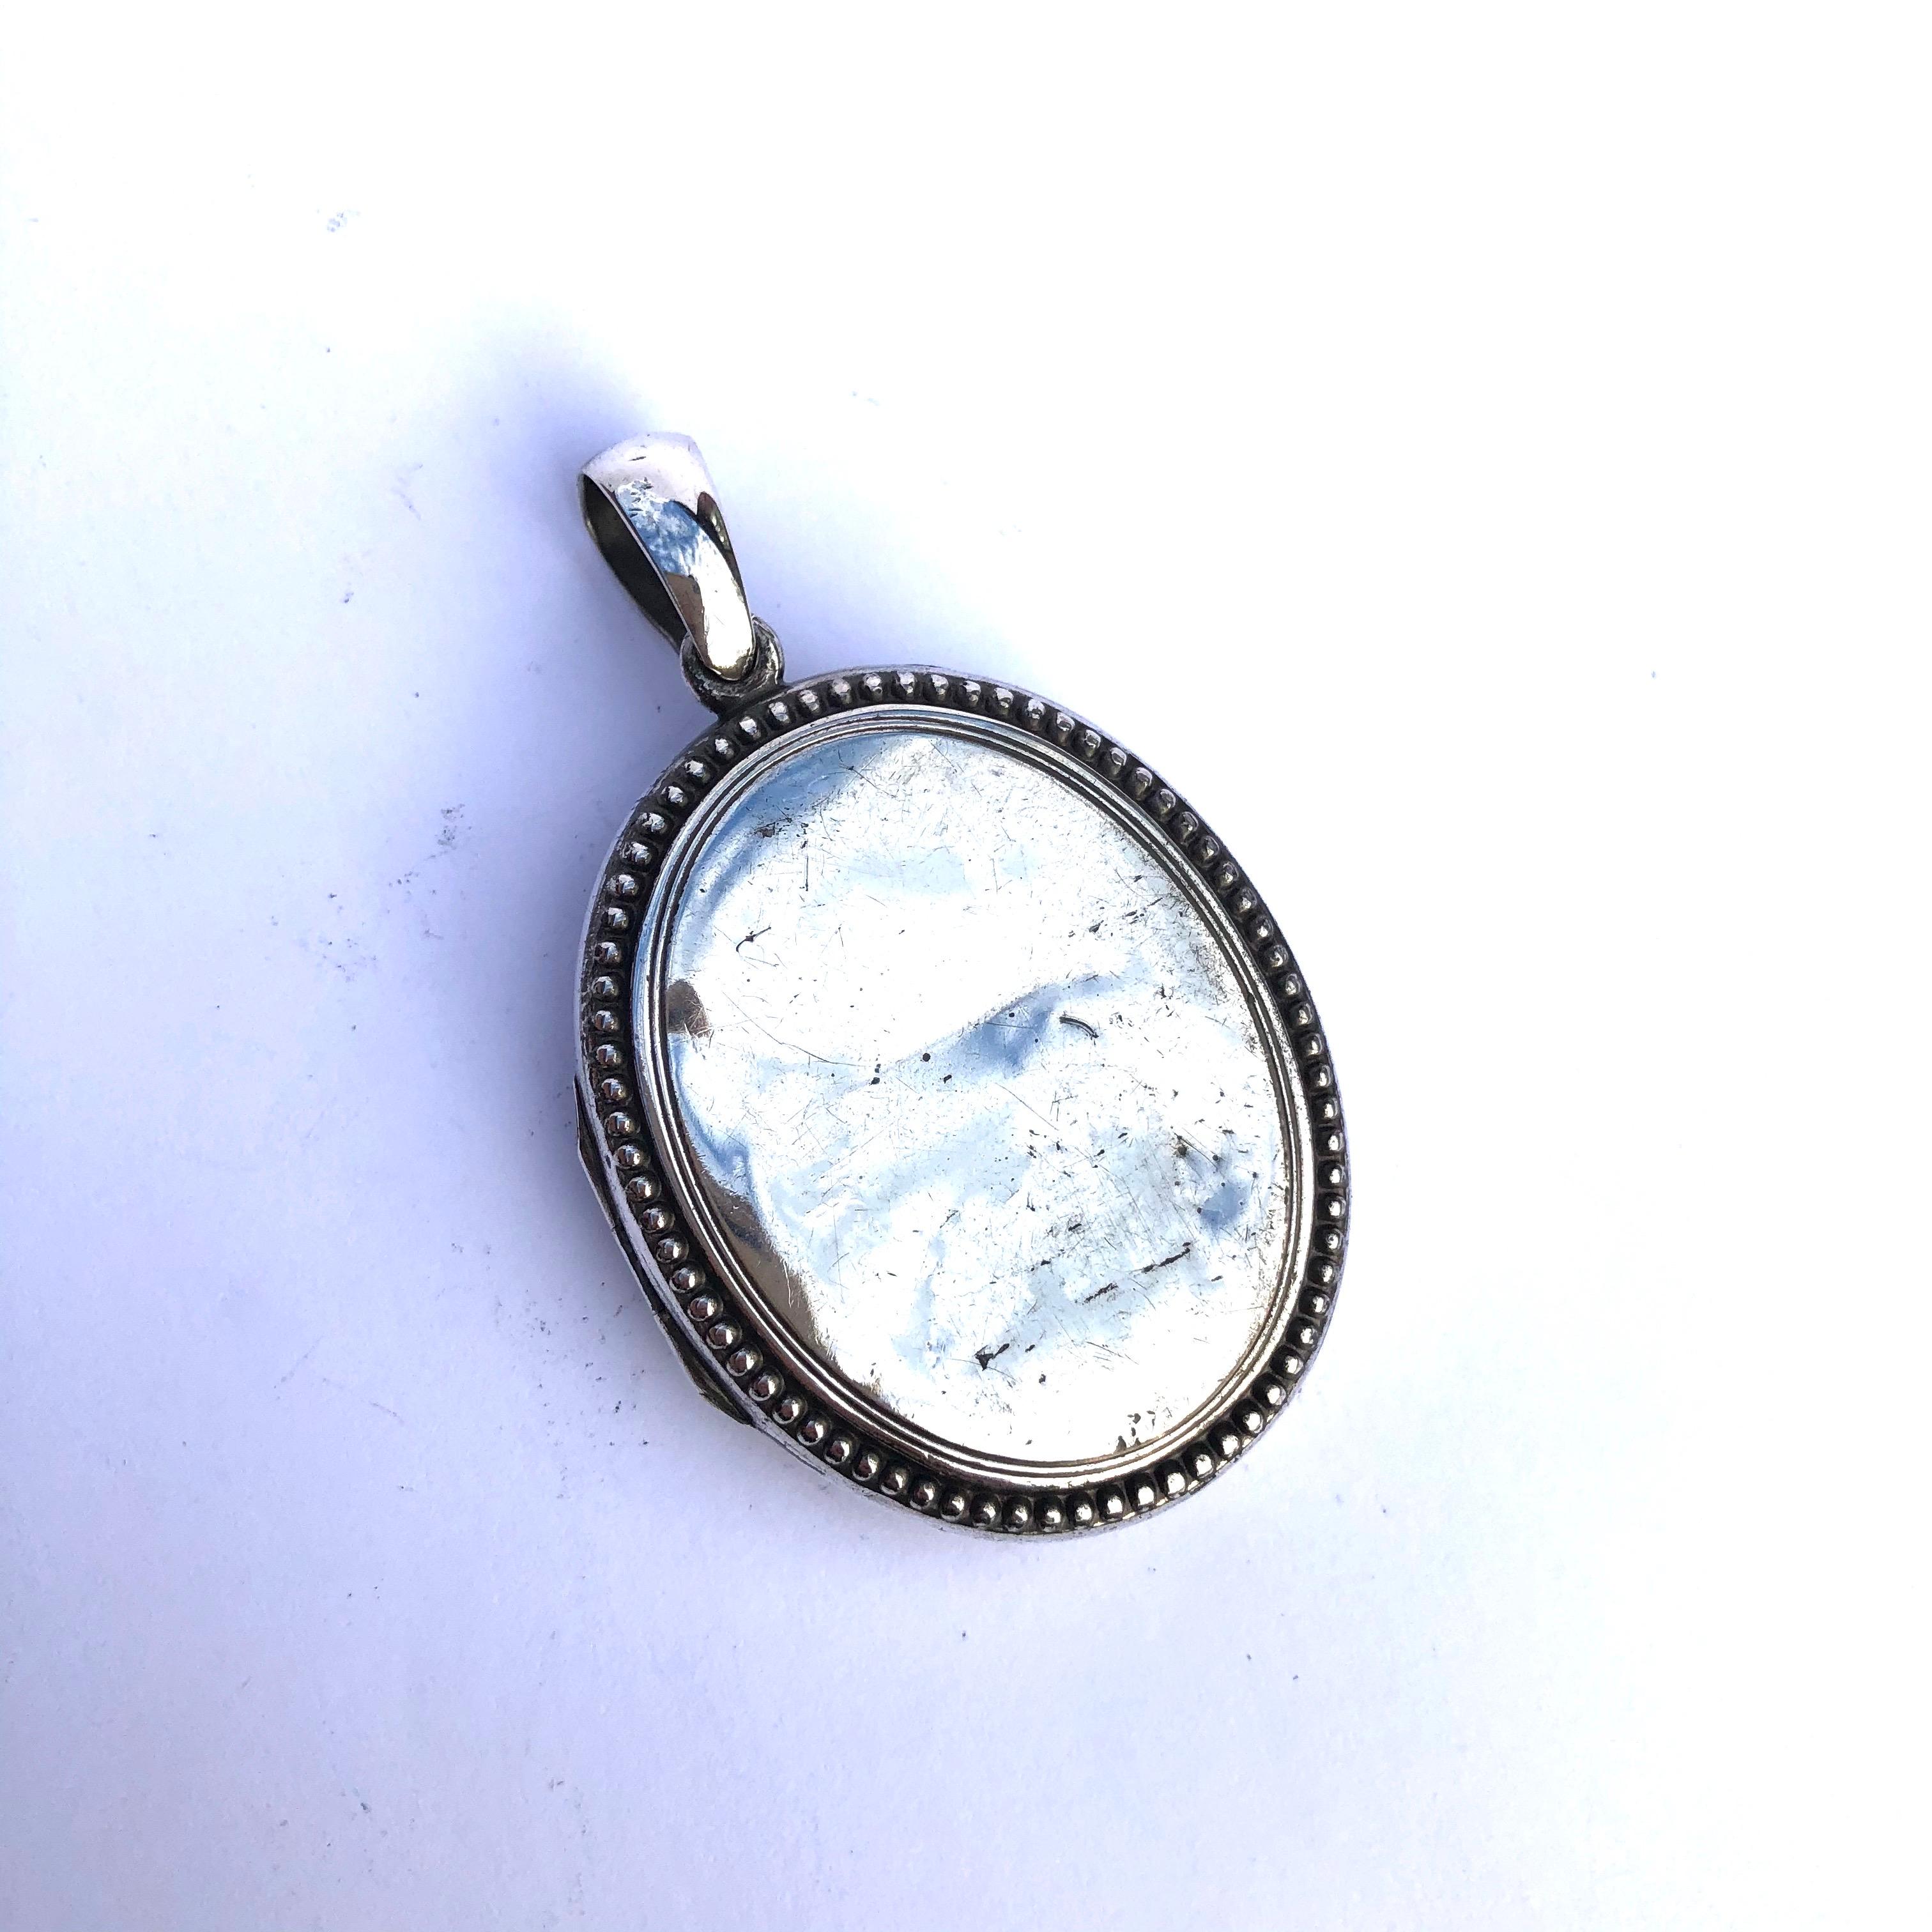 This wonderful silver locket features beaded detail around the edges and a panel that is raised. The inside has two compartments to keep your loved ones photo or lock of hair within. 

Dimensions Inc Loop: 55x 34mm 

Weight: 13.1g